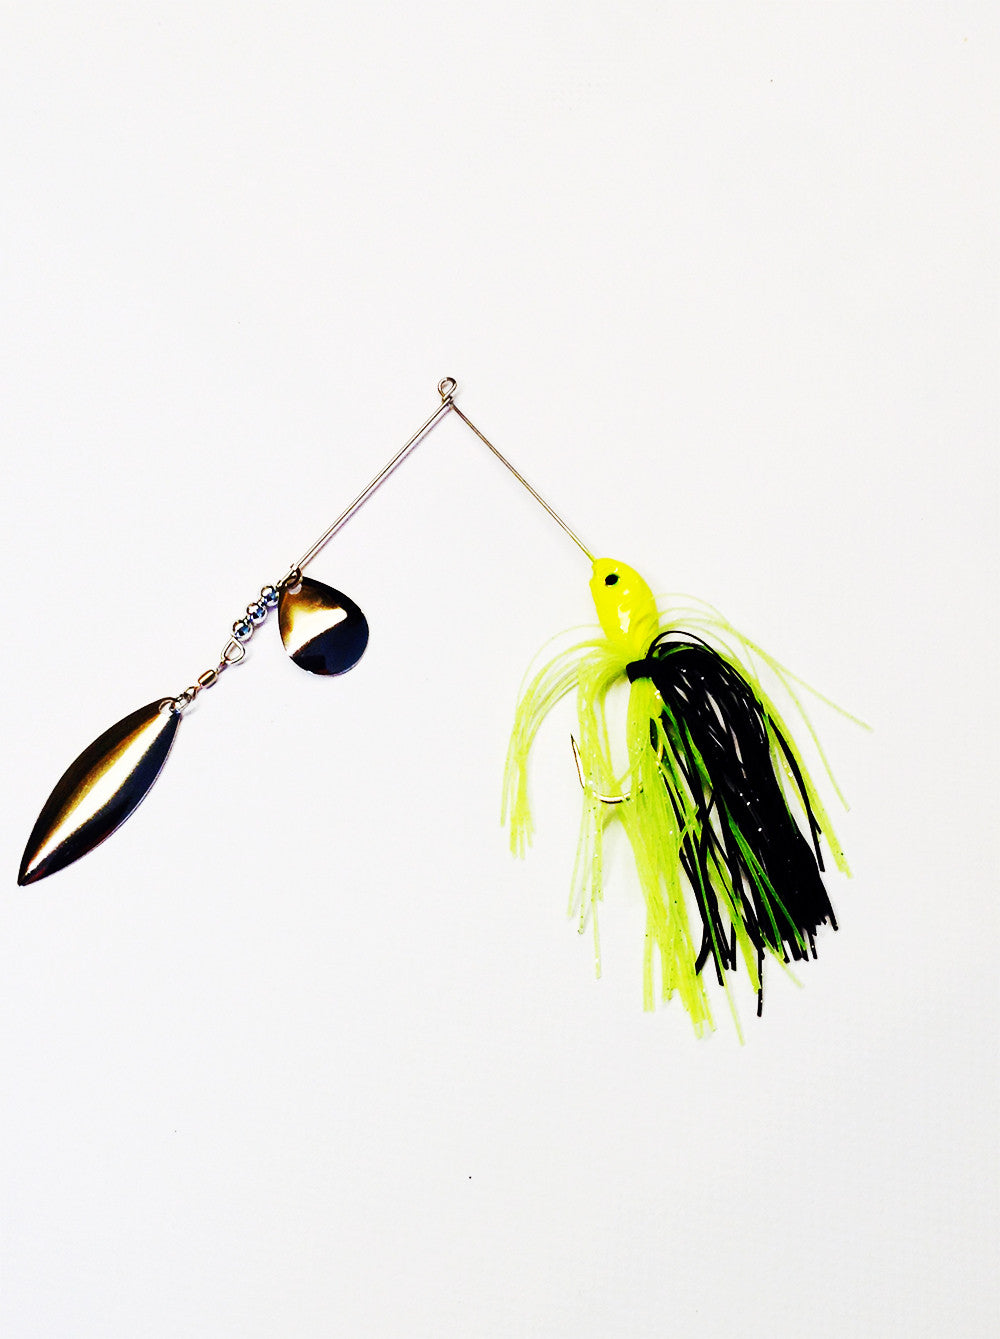 Spinnerbait - Epic Fishing Tackle